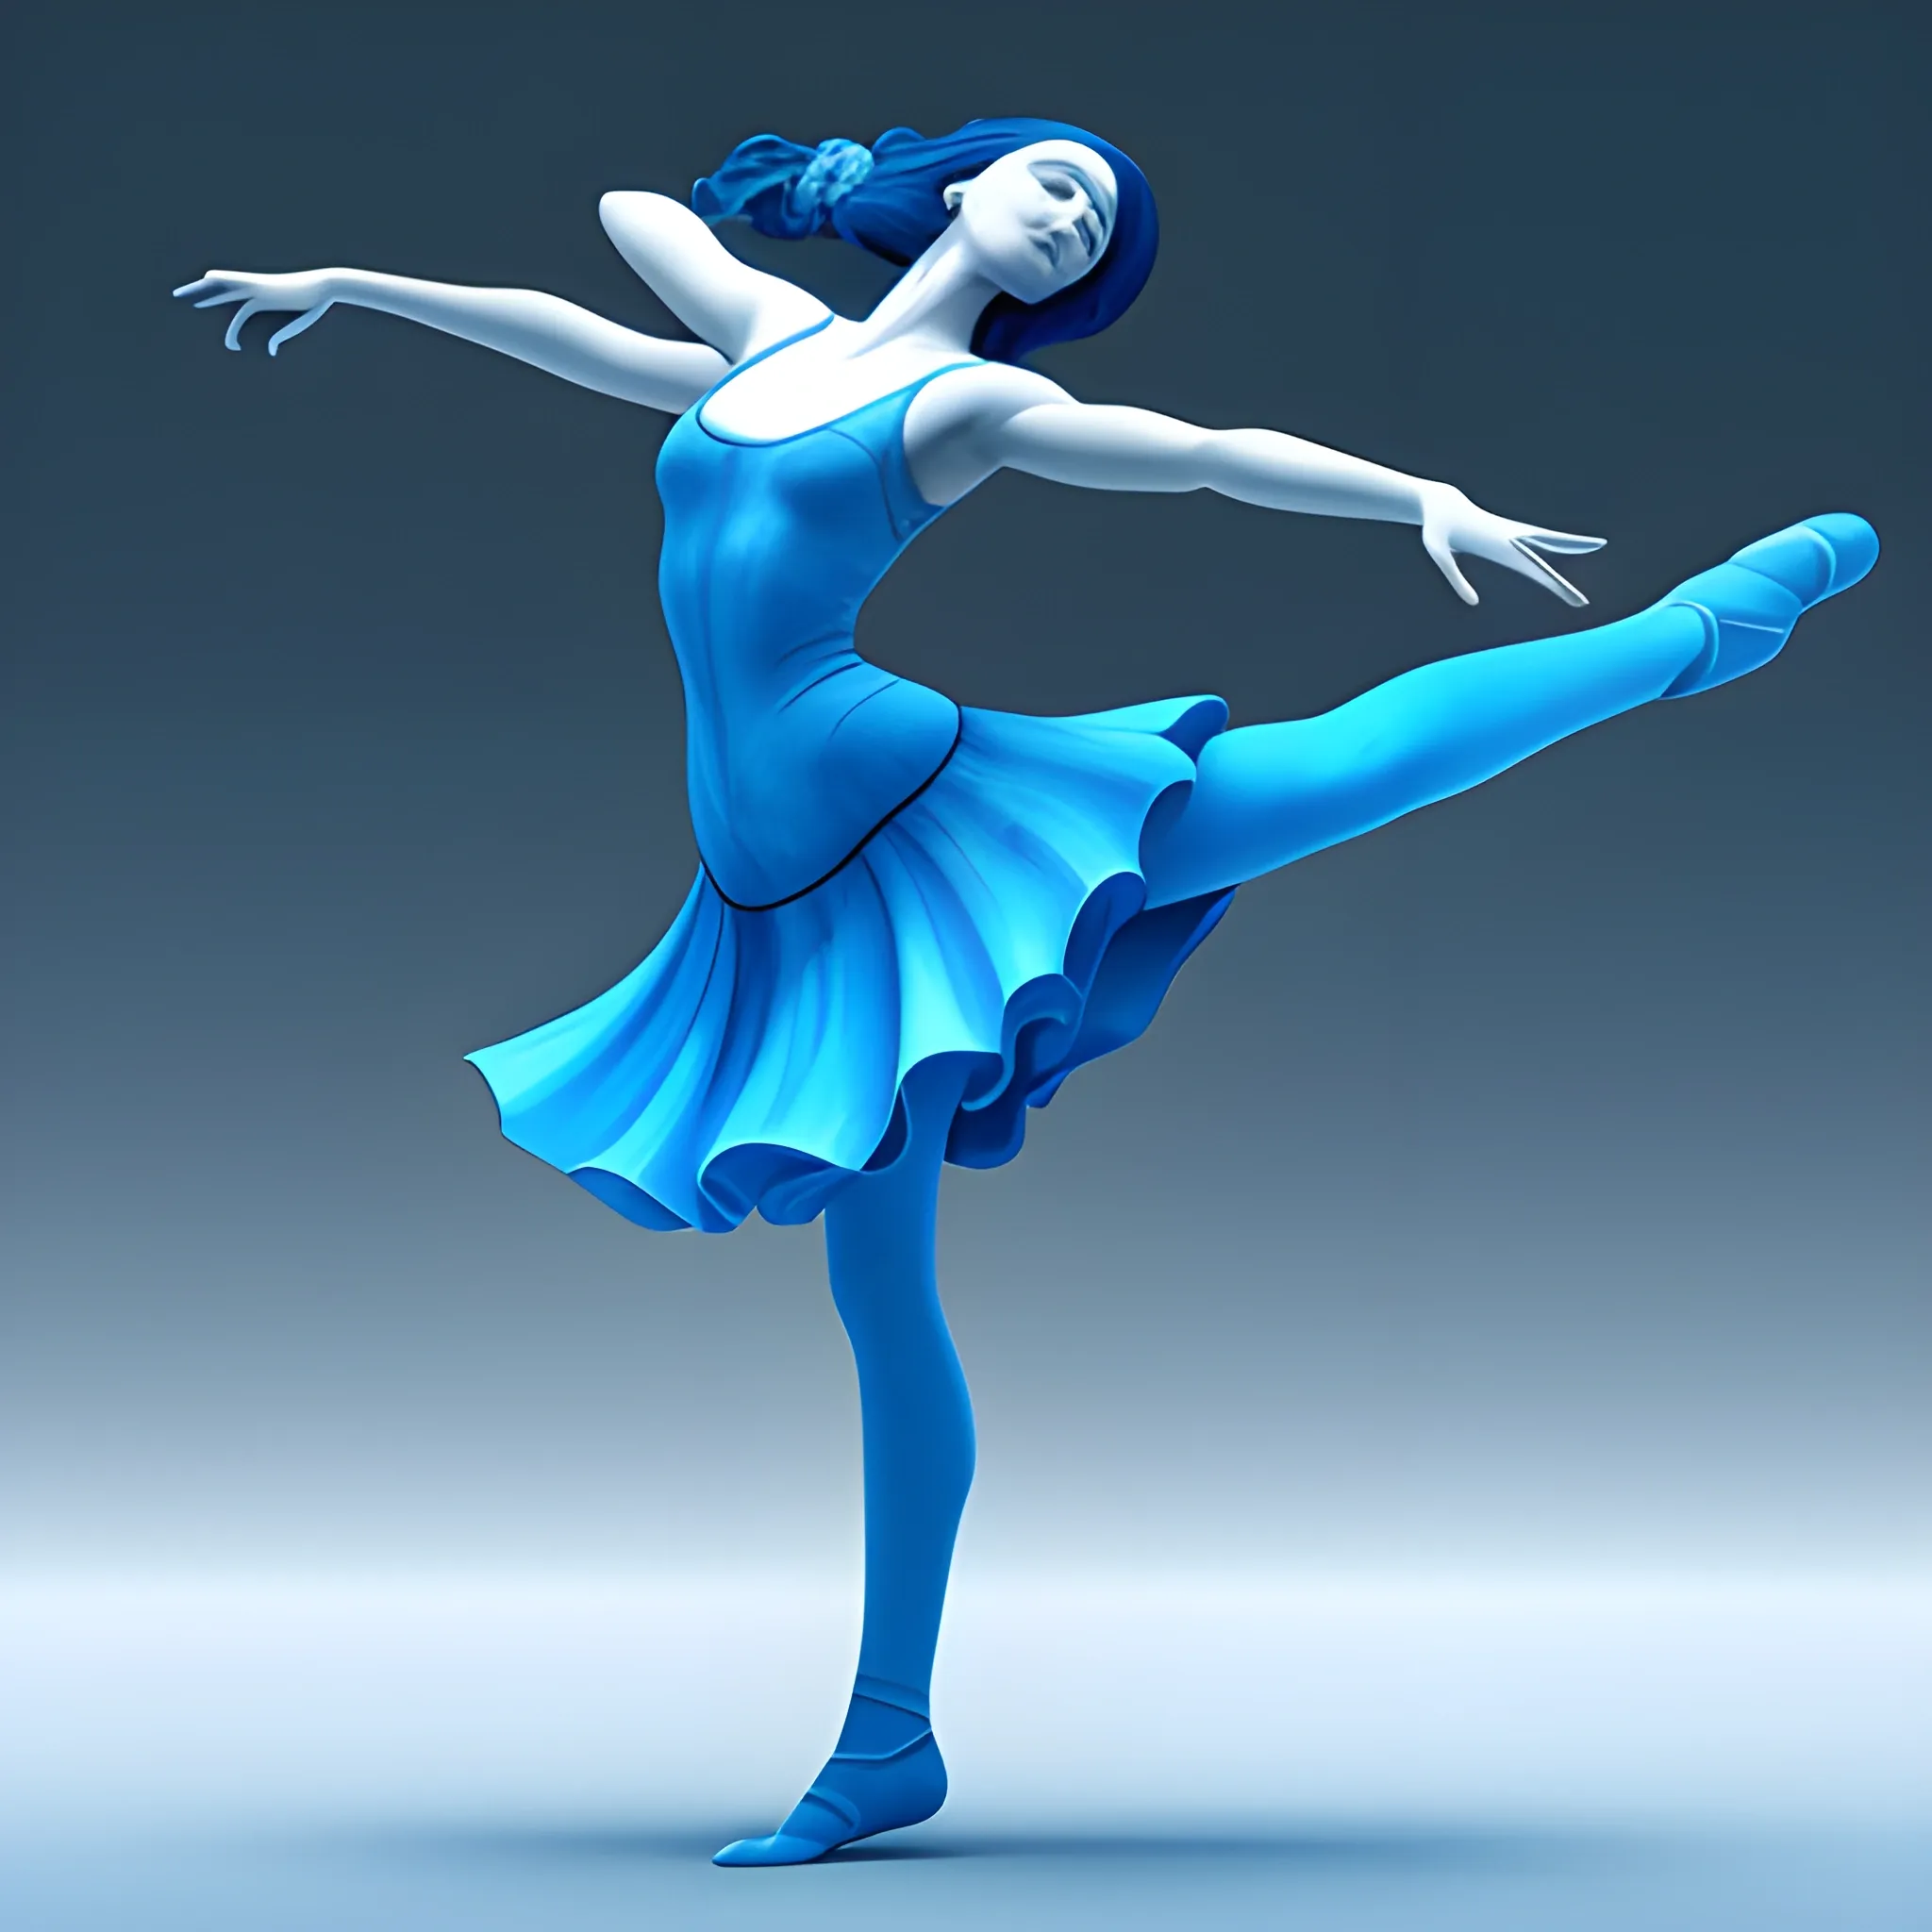 painting with a woman to dance and have dence movement minimal elements and baroc colors all scale of blue 
fantasy, 8k, high resolution, high quality, 3D